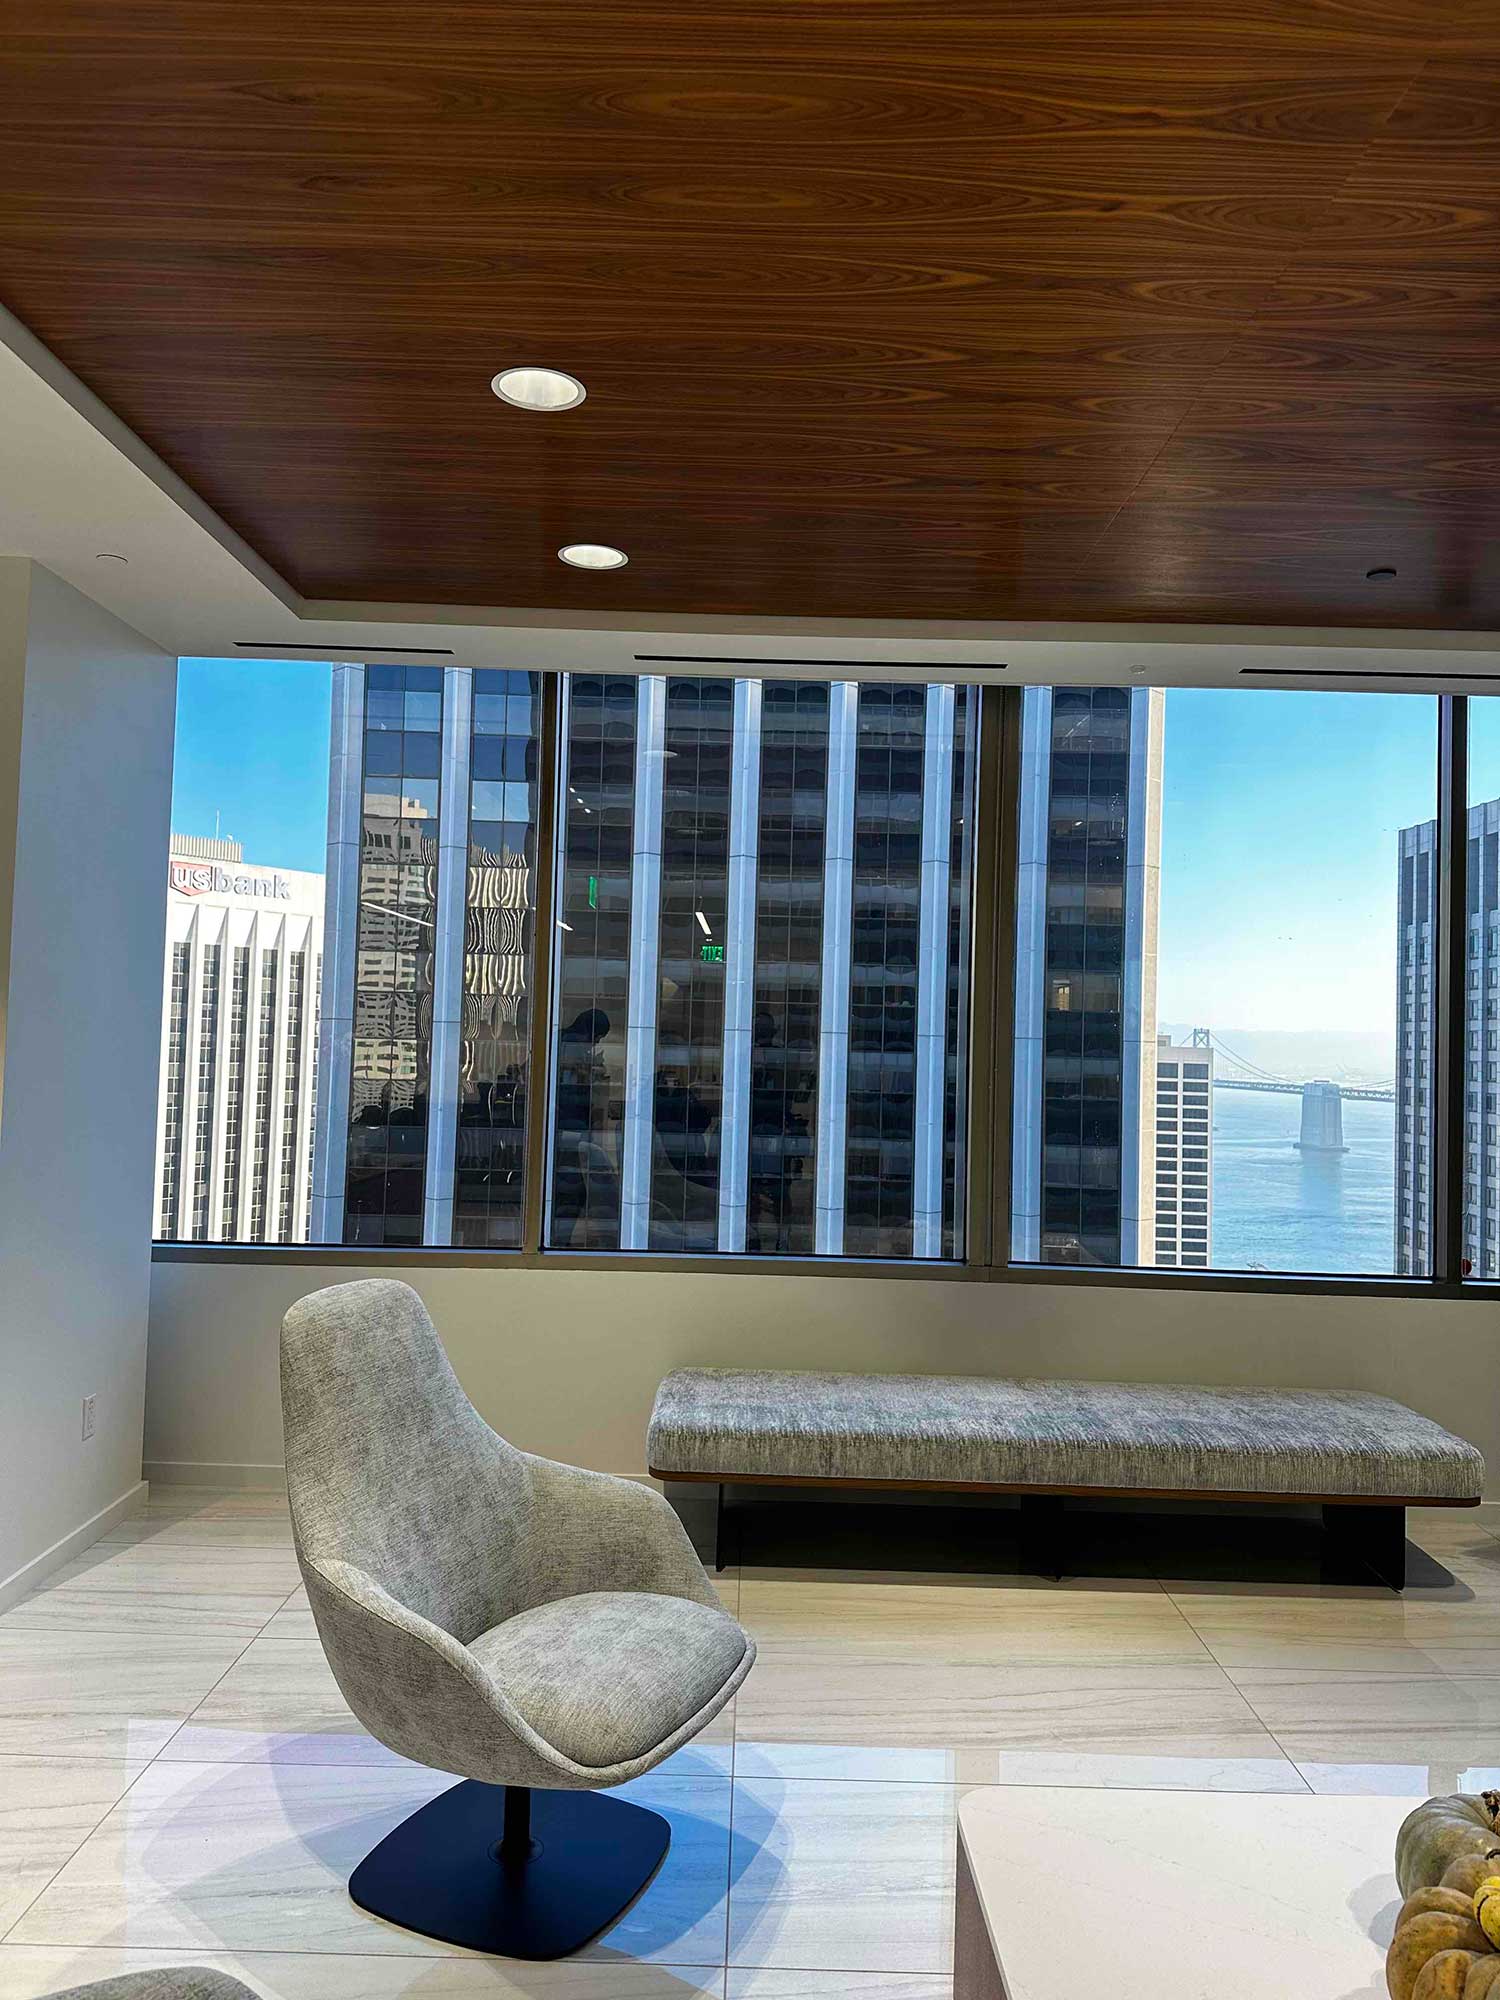 CliimatePro installs window tint in an office in San Francisco. Window film reduces glare, UV rays, and eye strain. Get a free estimate today.